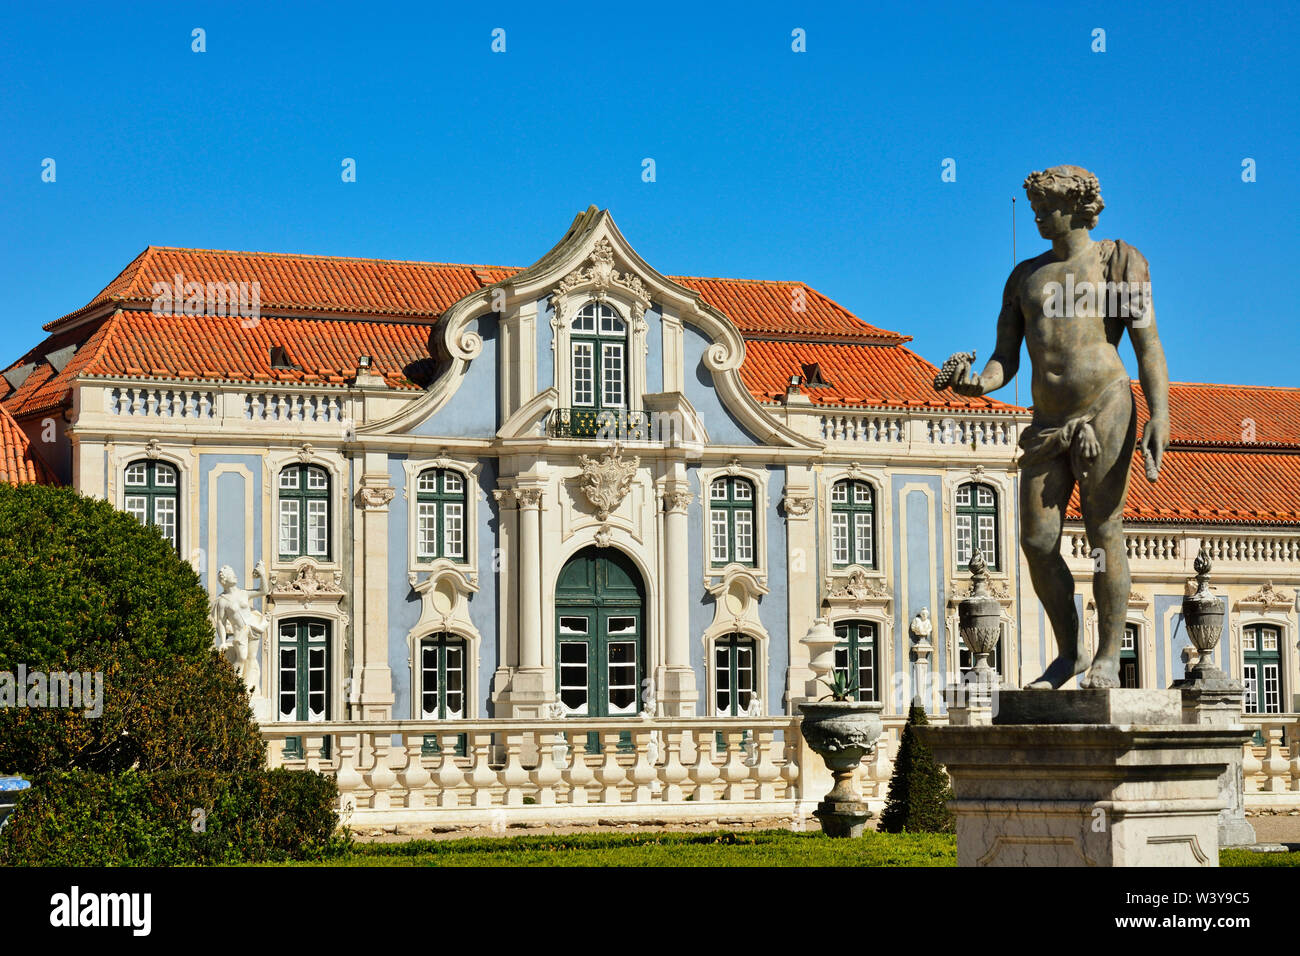 The Queluz National Palace (Palacio Nacional de Queluz), dating back to the 18th century, is a reference of rococo and neoclassical architecture in Portugal. Lisbon, Portugal Stock Photo